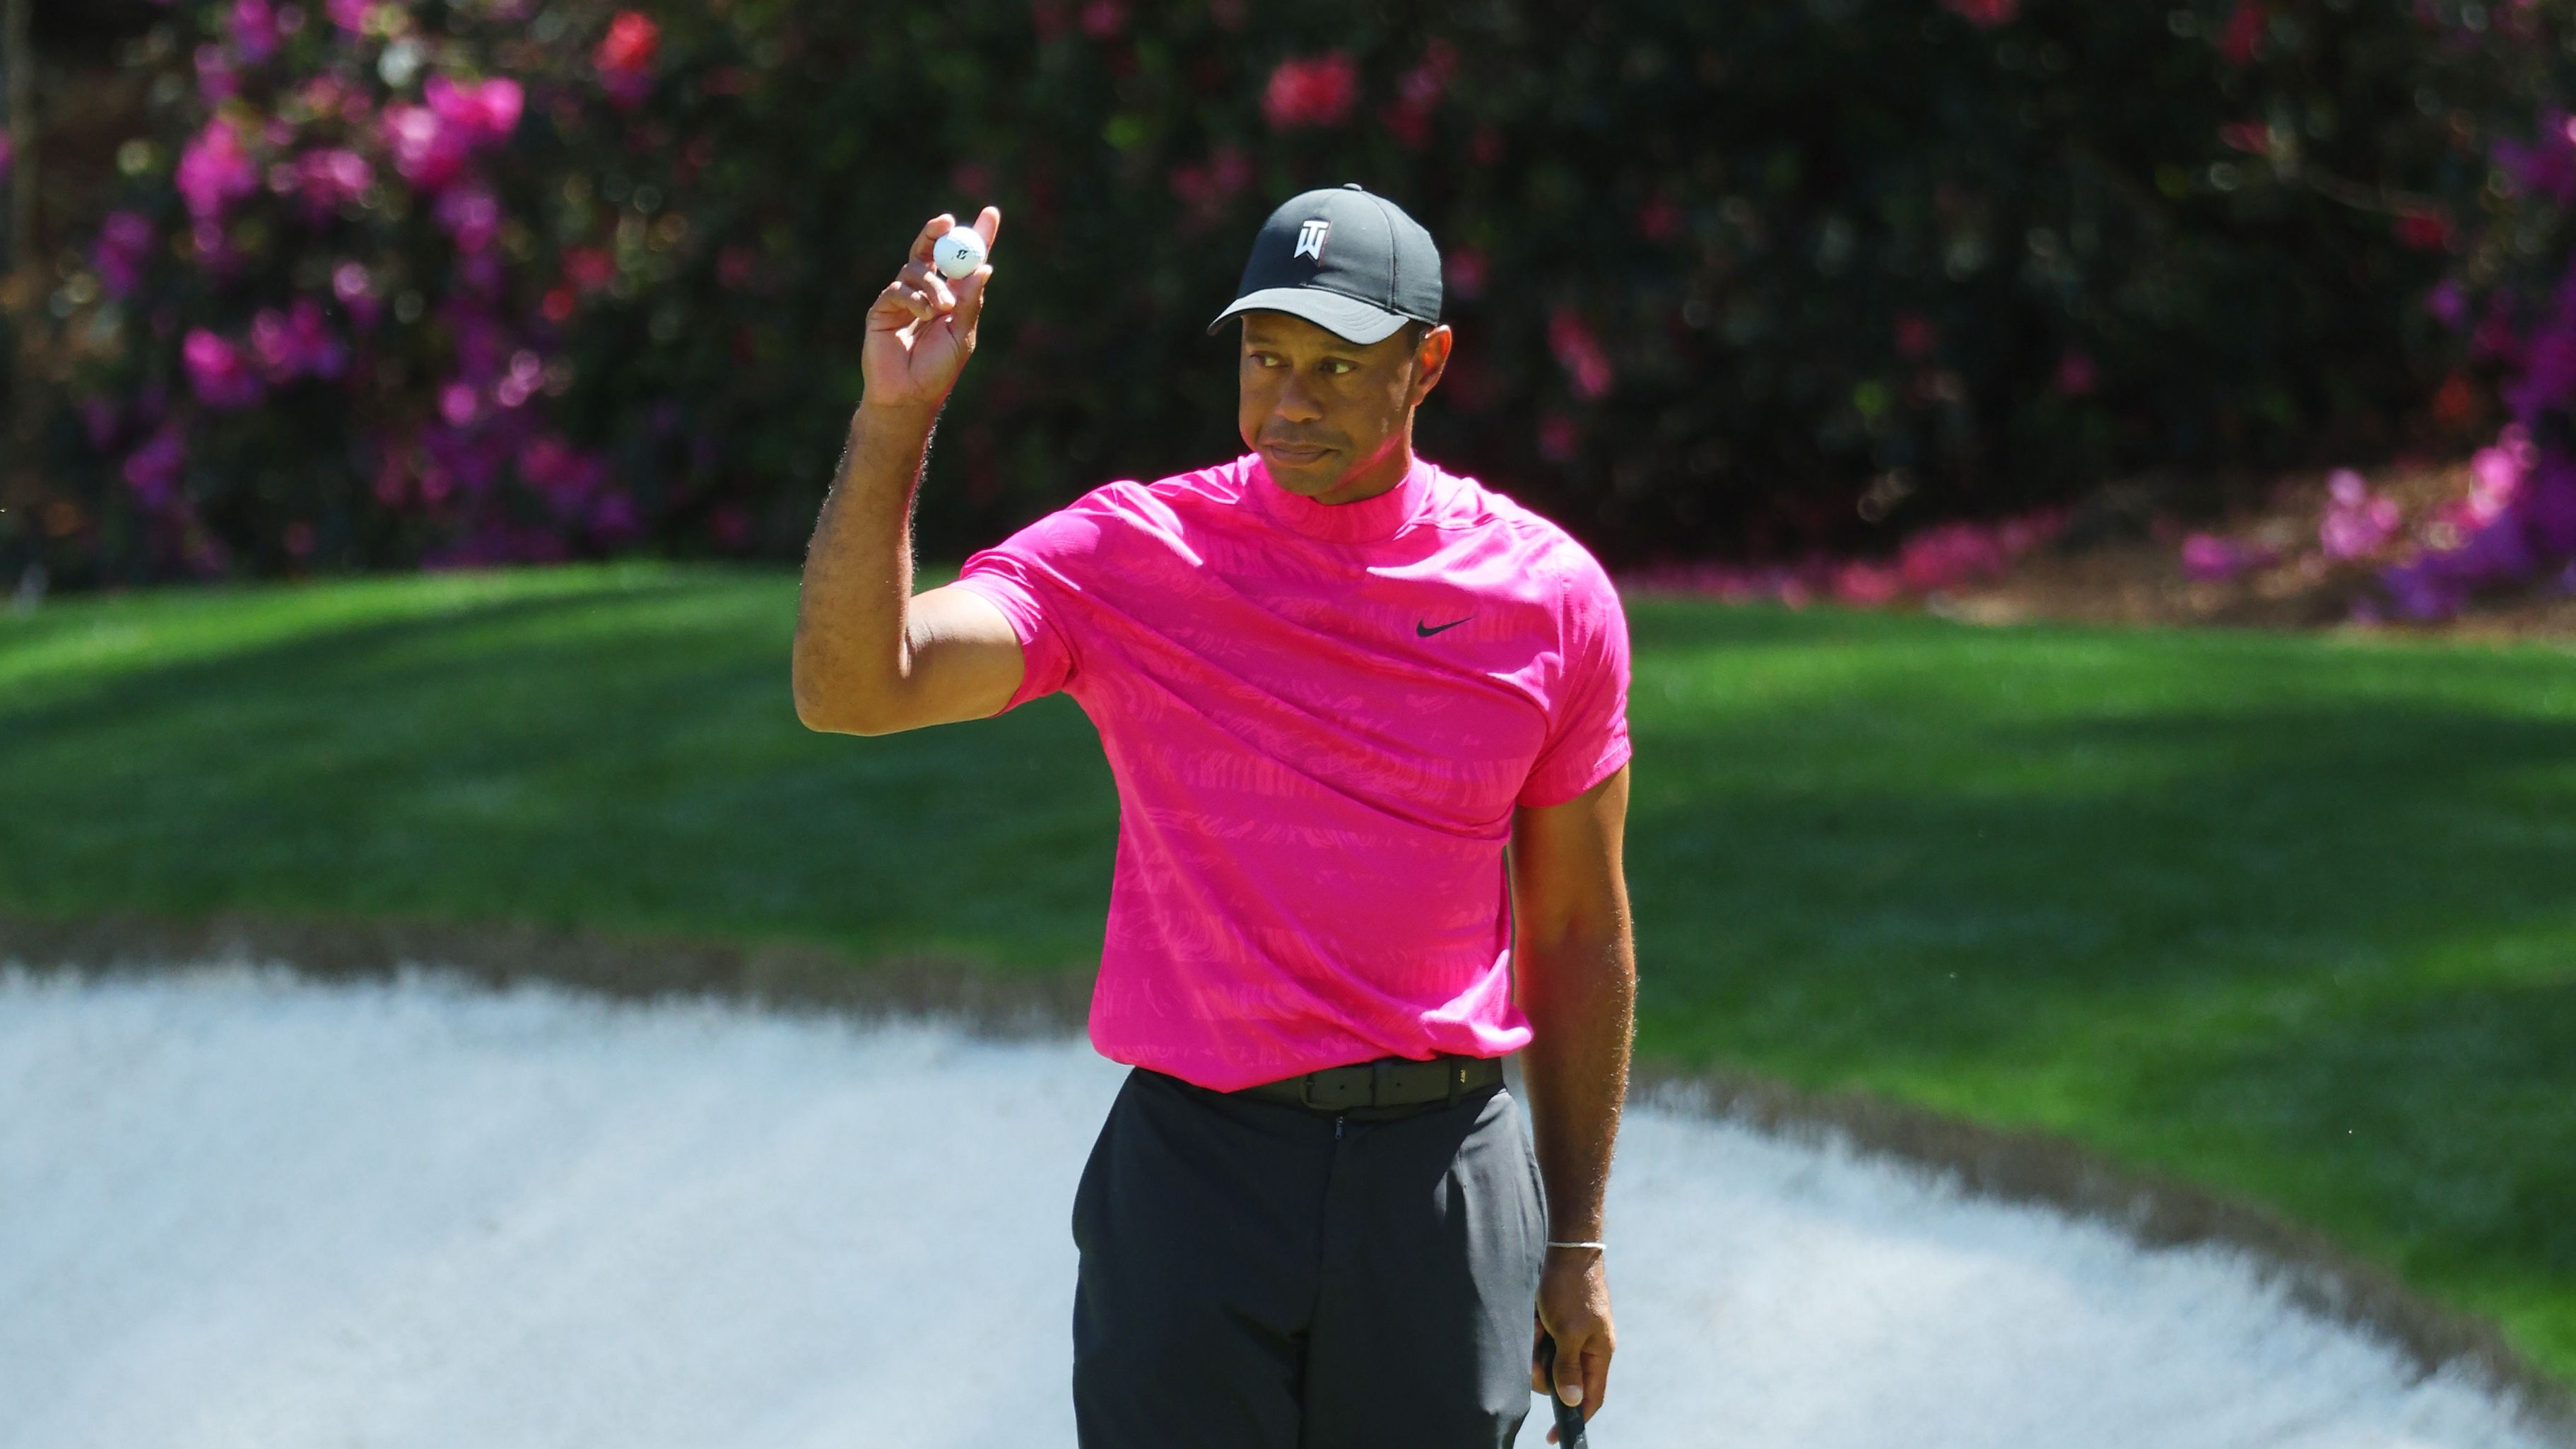 Aussie Cameron Smith in contention at Augusta as Woods thrills patrons with Masters comeback